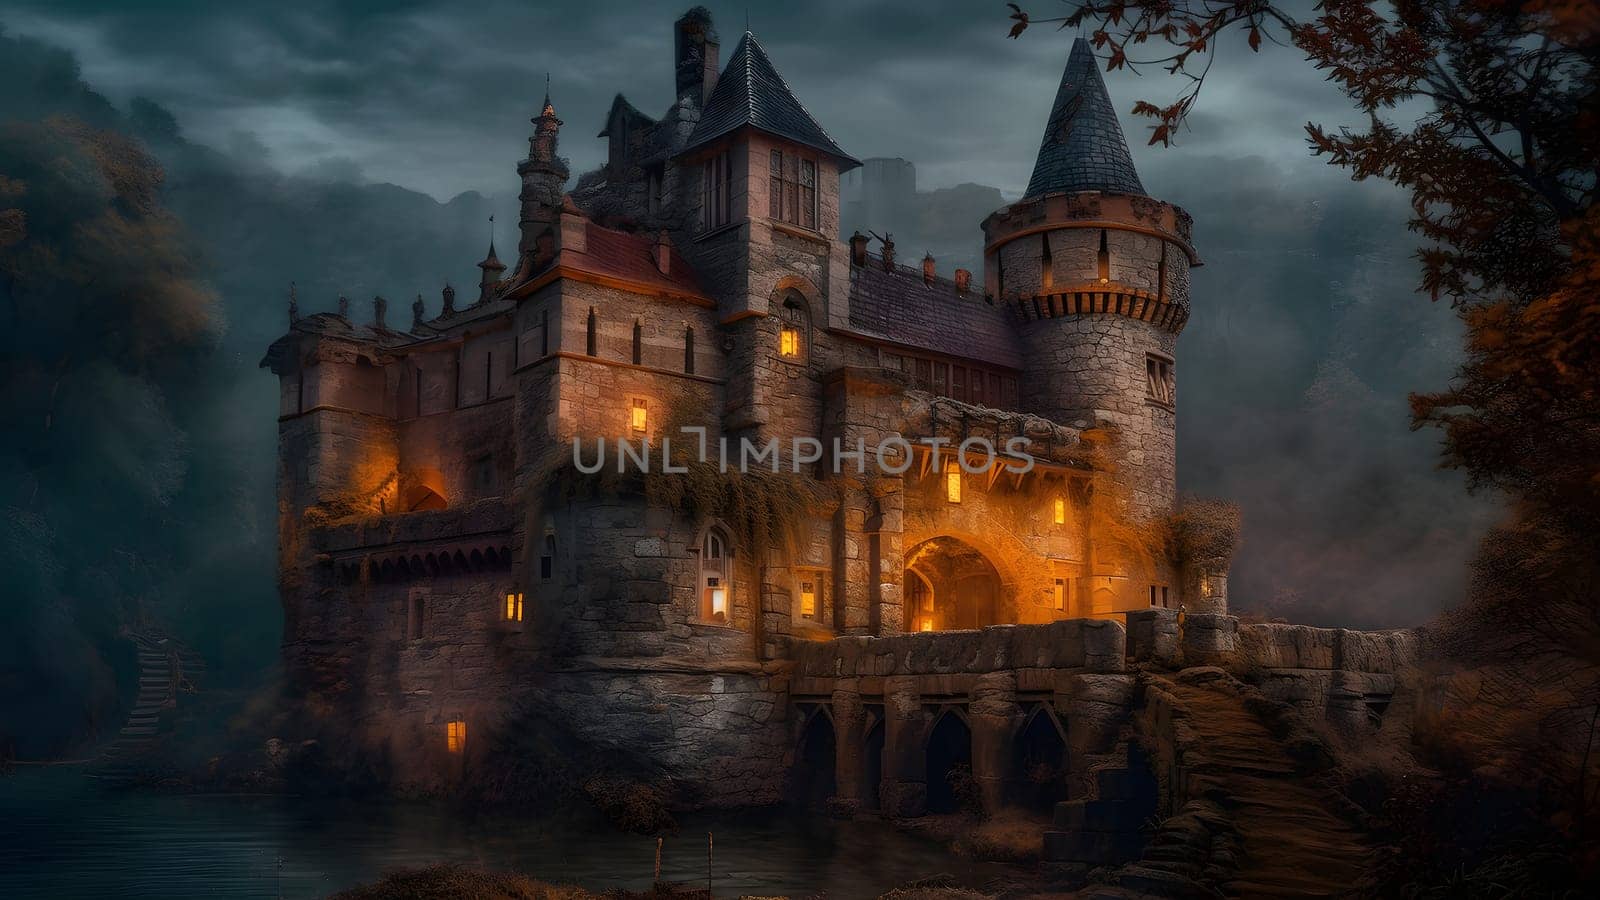 dark foggy night scene with gothic medieval stone castle building. Neural network generated in May 2023. Not based on any actual scene or pattern.